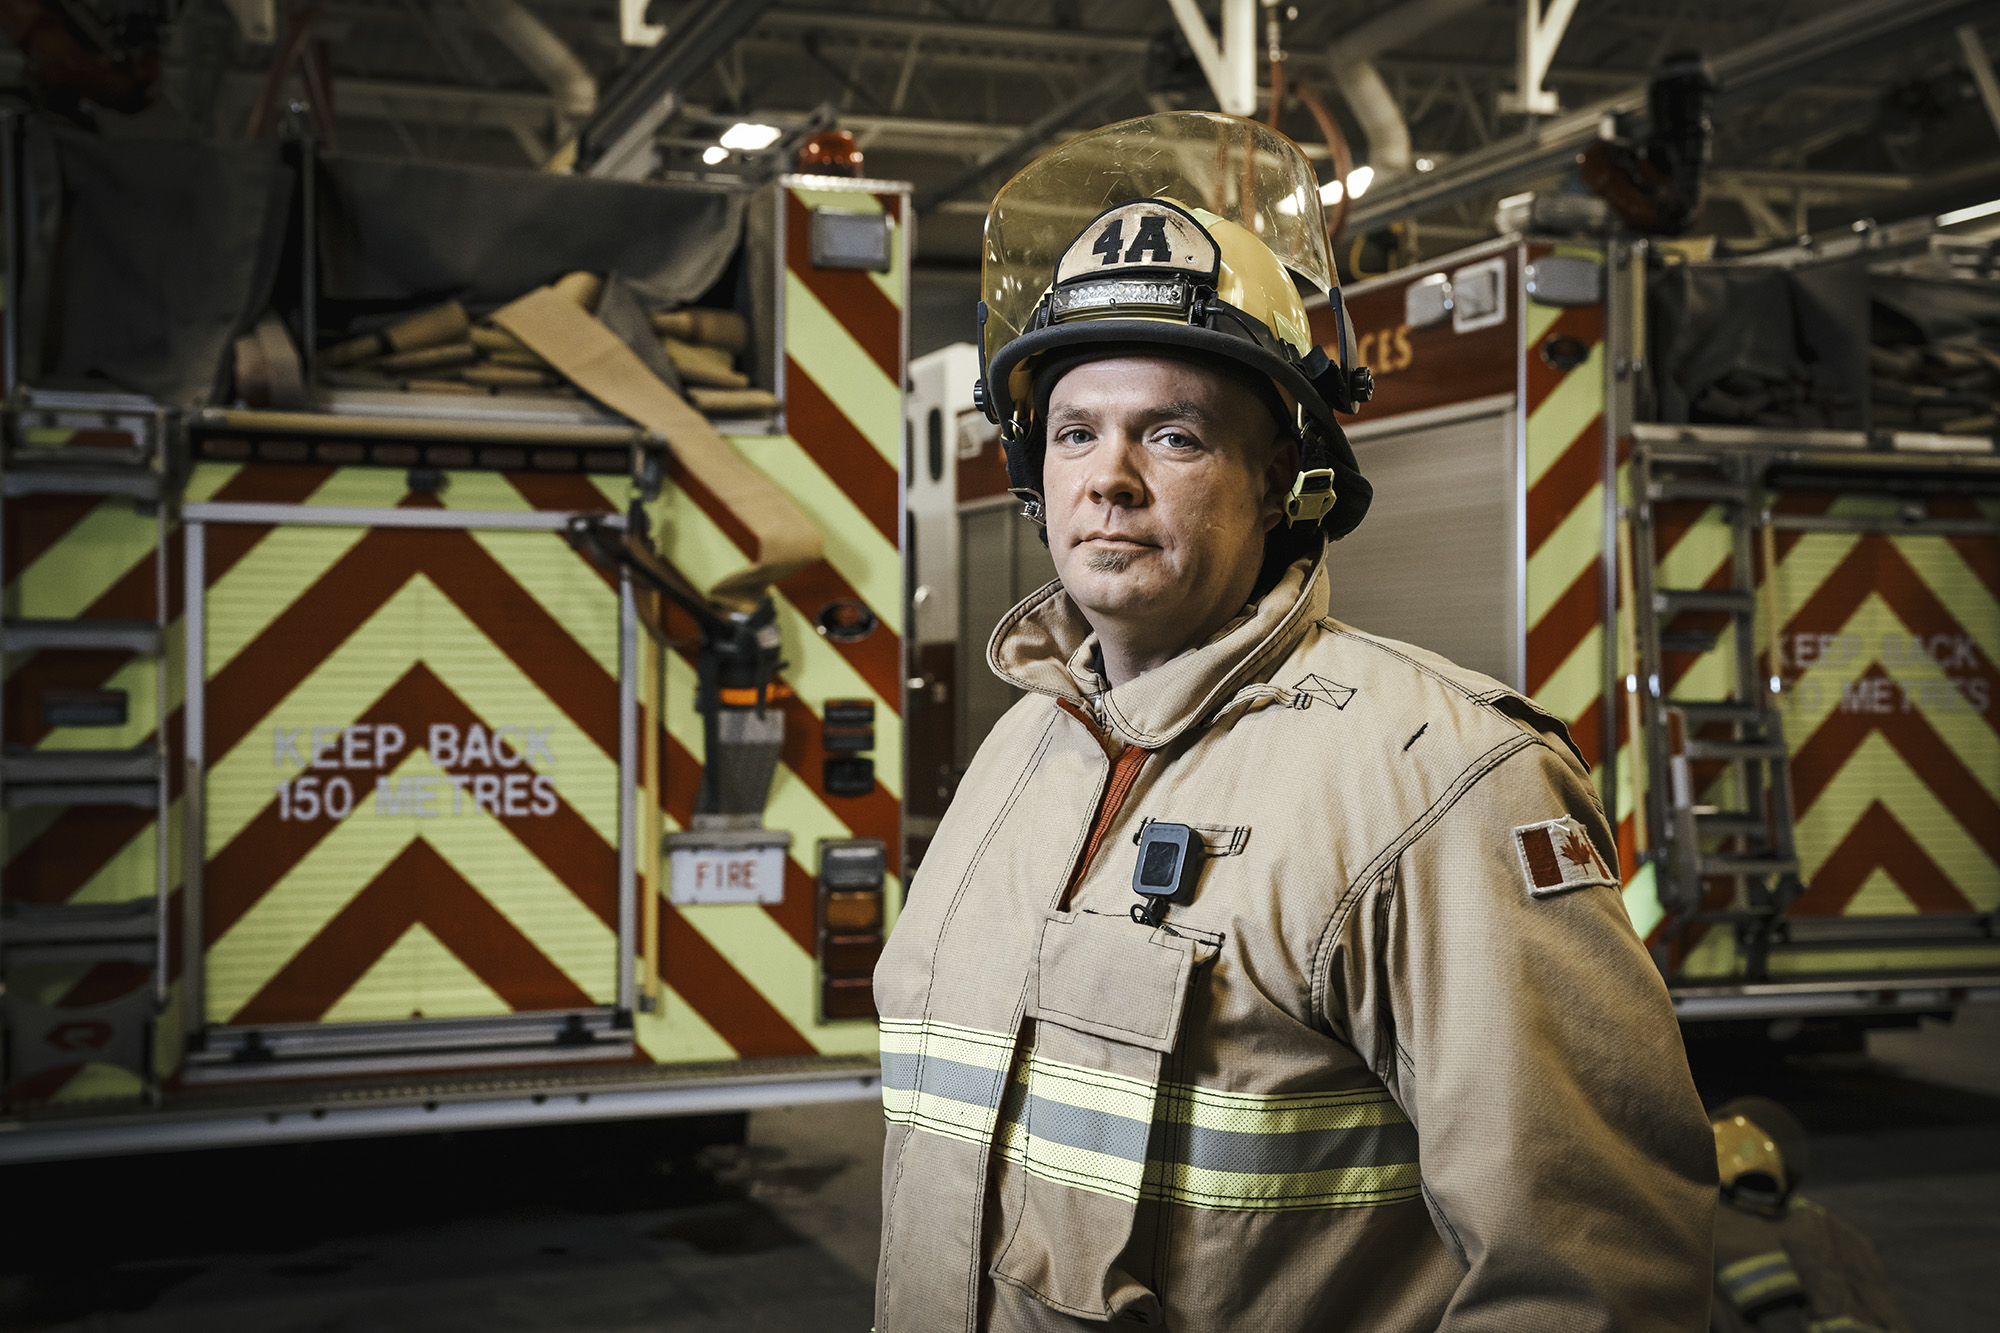 Regina firefighter Todd Frei says online therapy gave him strategies to help maintain his mental health. (Photo by Trevor Hopkin)